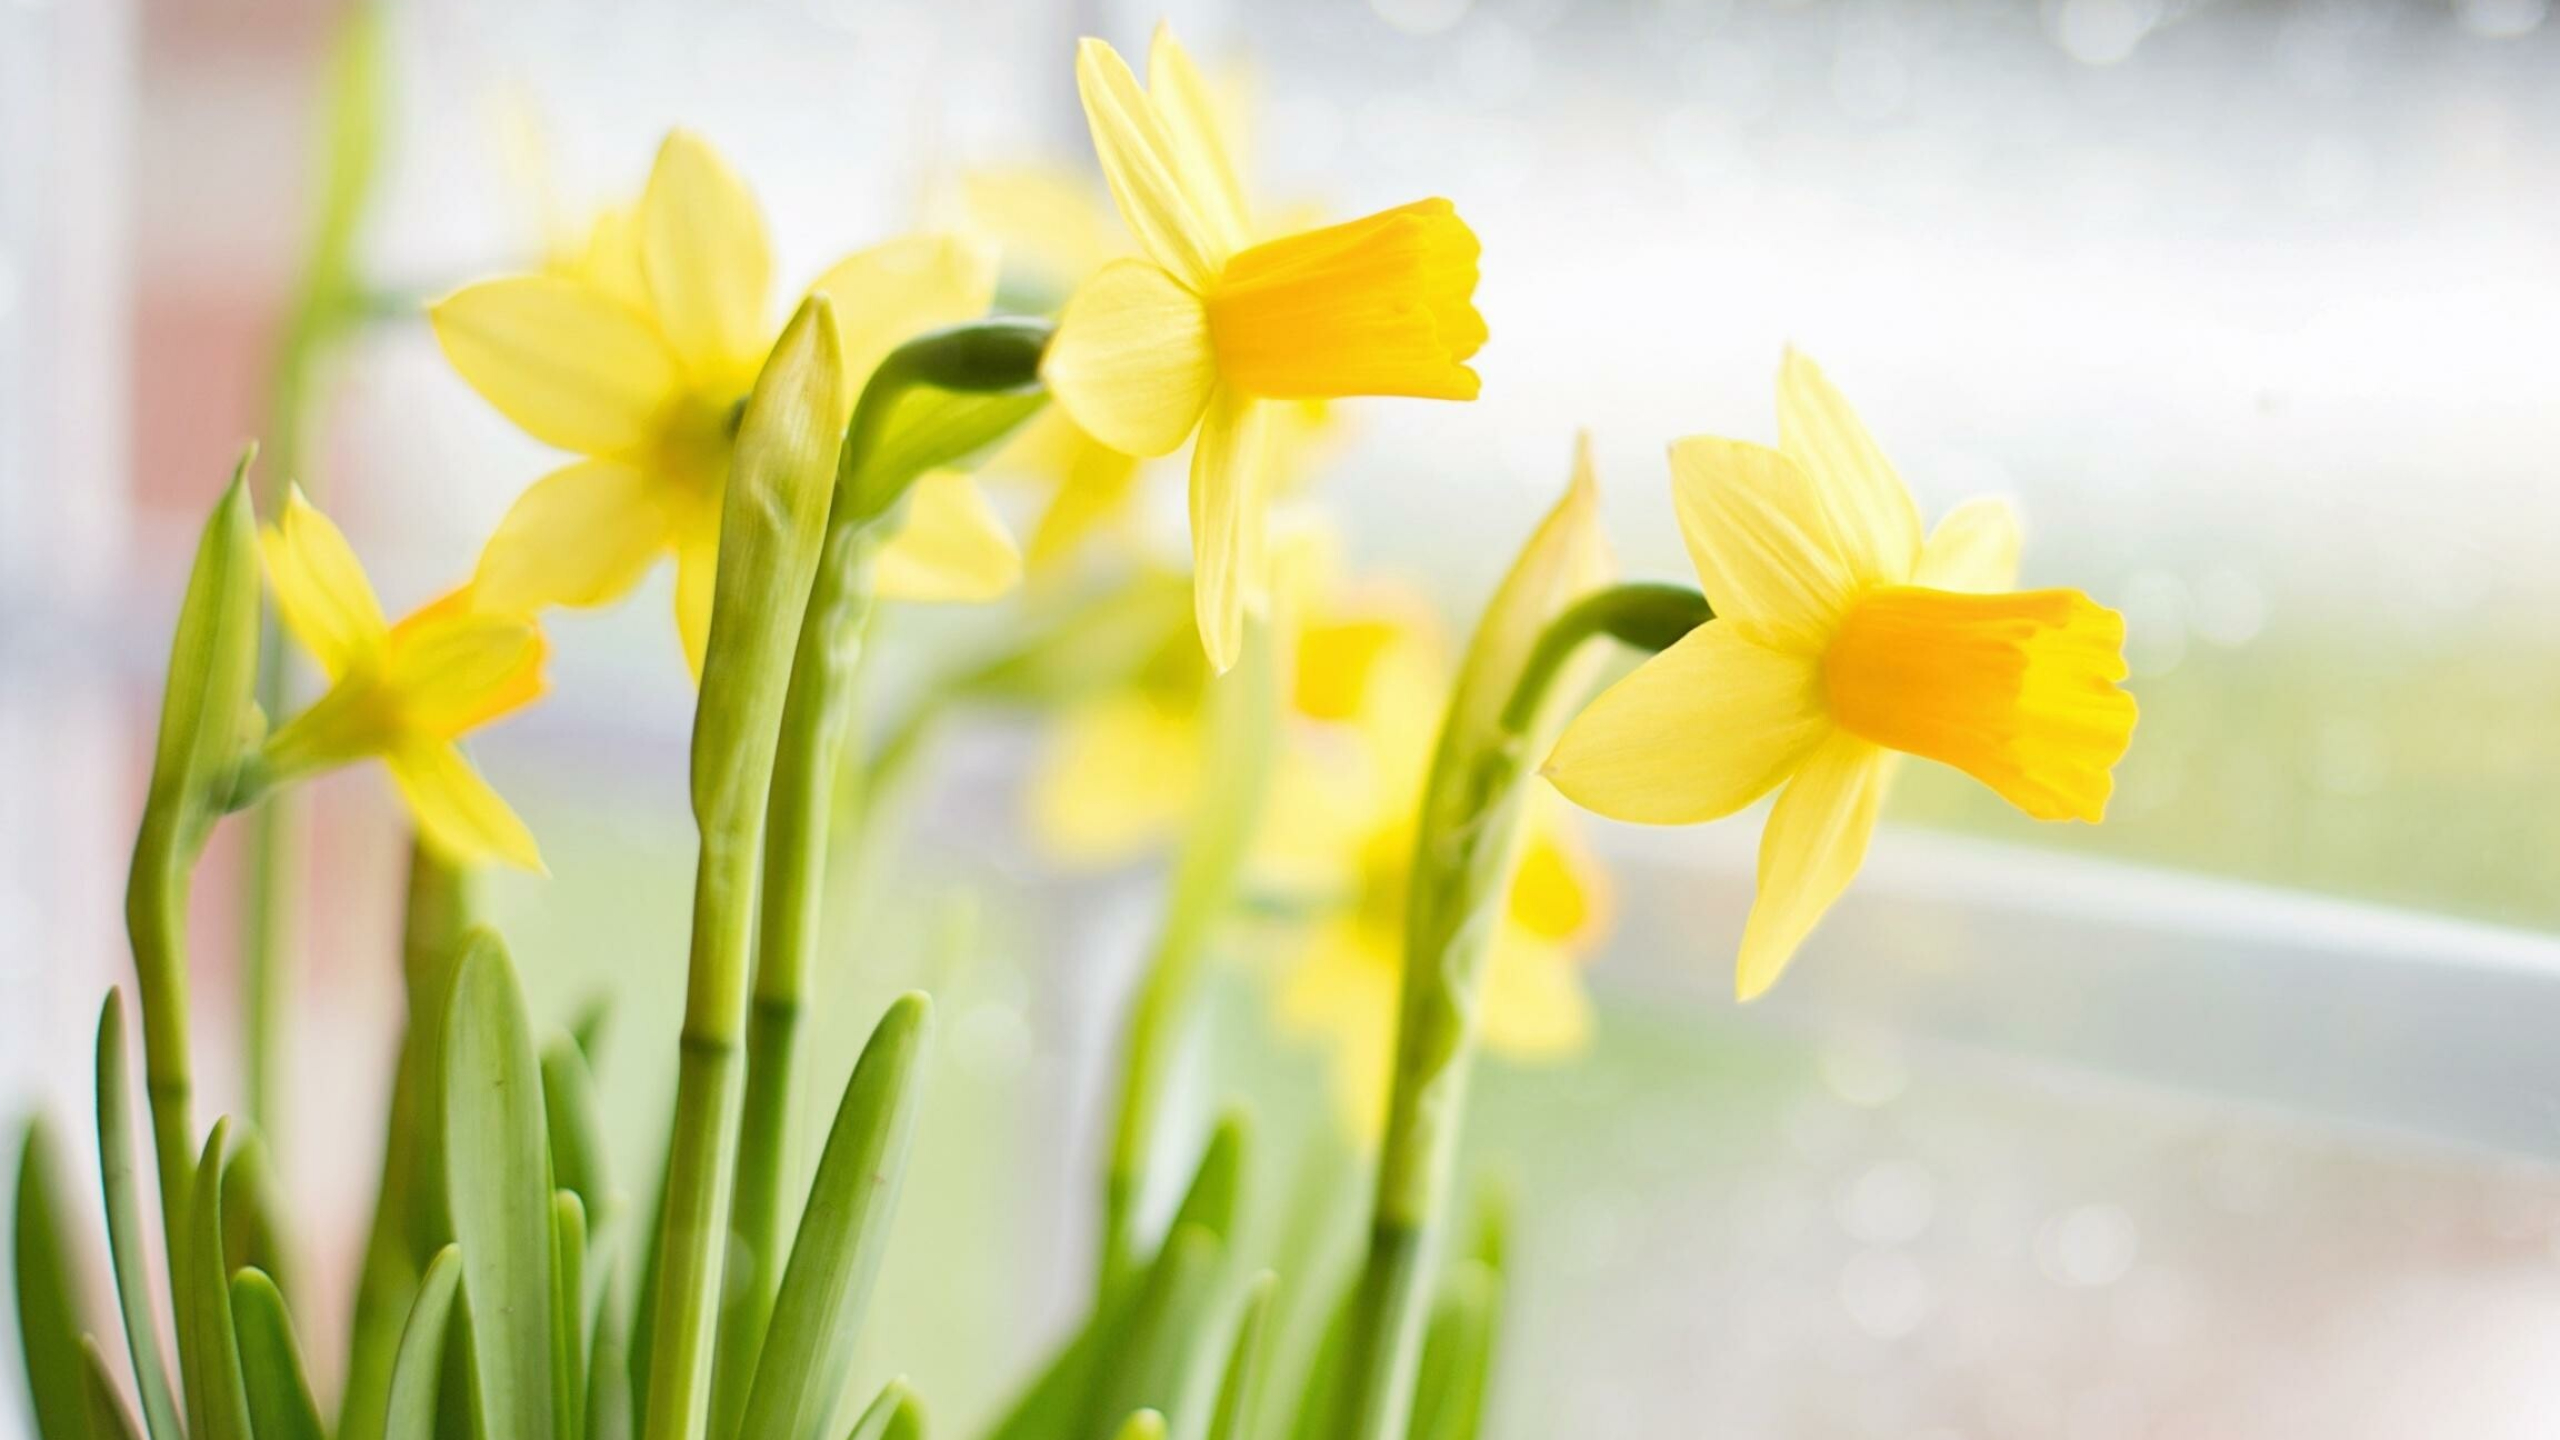 Daffodil: The species are native to meadows and woods in southern Europe and North Africa with a centre of diversity in the Western Mediterranean, particularly the Iberian peninsula. 2560x1440 HD Wallpaper.